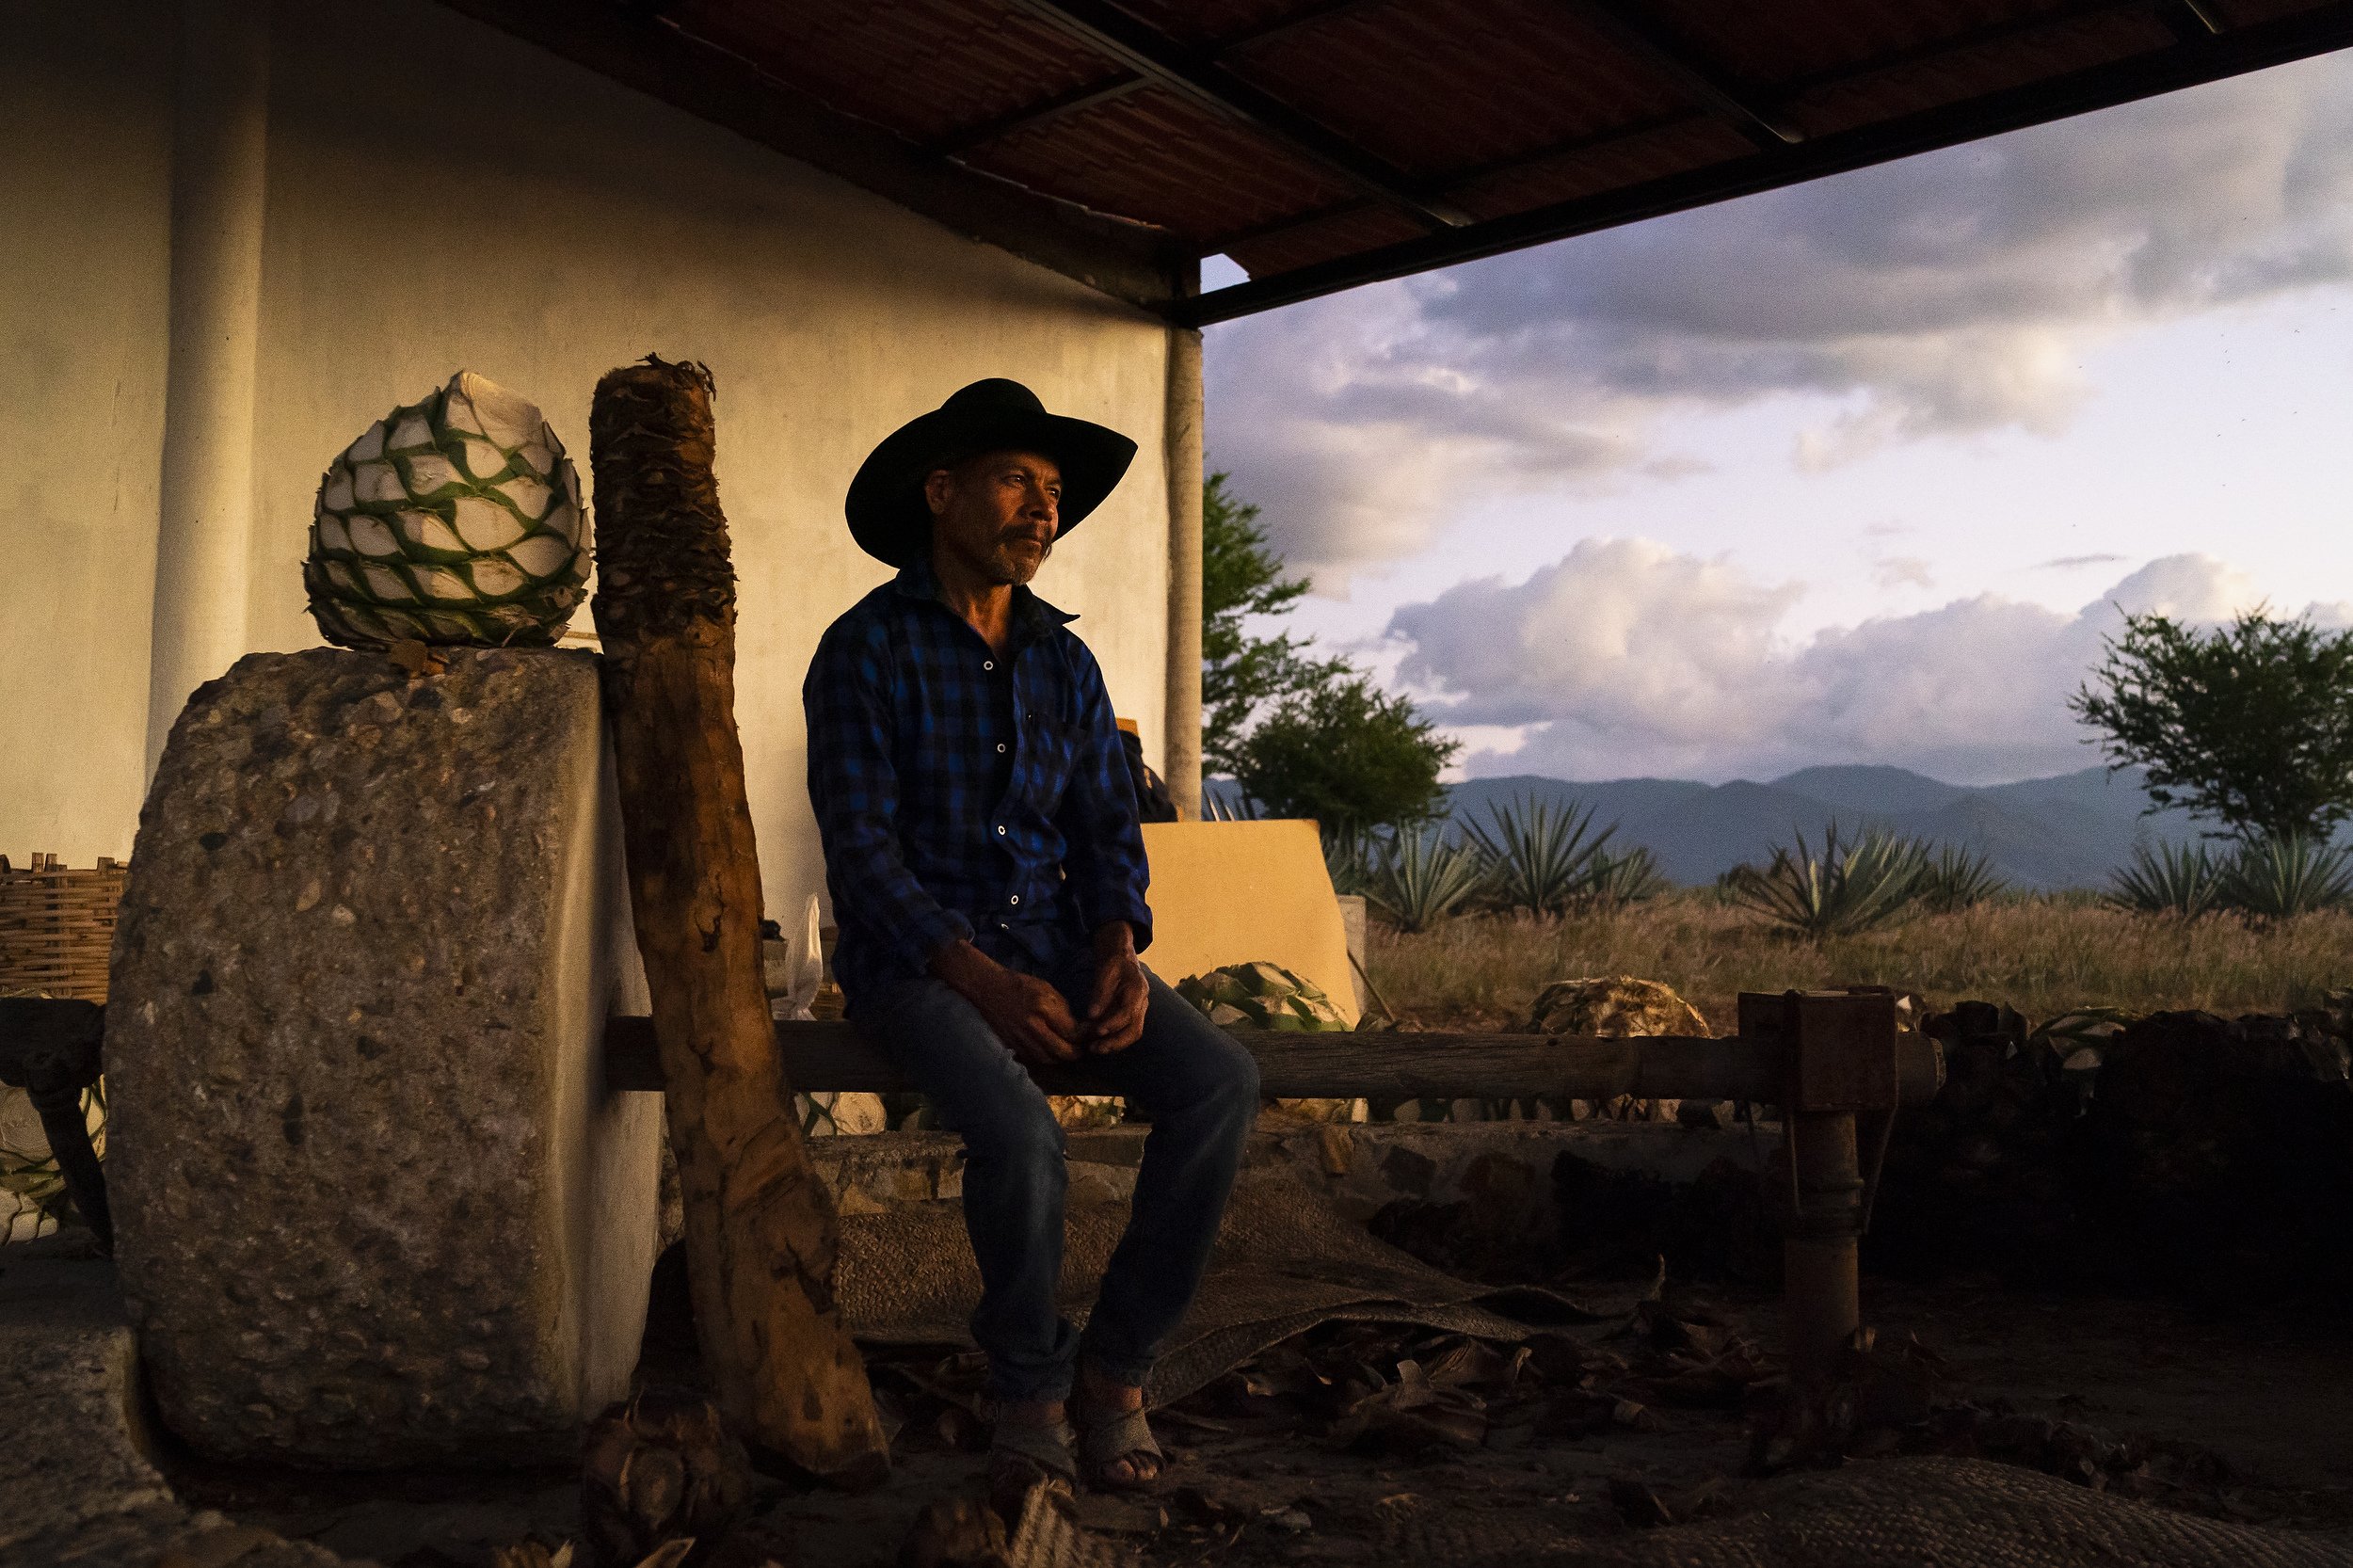  Epifanio Vásquez Ríos, master mezcalero, sits in the middle of a tahona, a stone grinder used for mezcal production, as the sun sets at Hacienda Carreño on Saturday, Dec. 5, 2021 in San Dionisio Ocotlán, Oaxaca, Mexico. "Each agave has its own perso